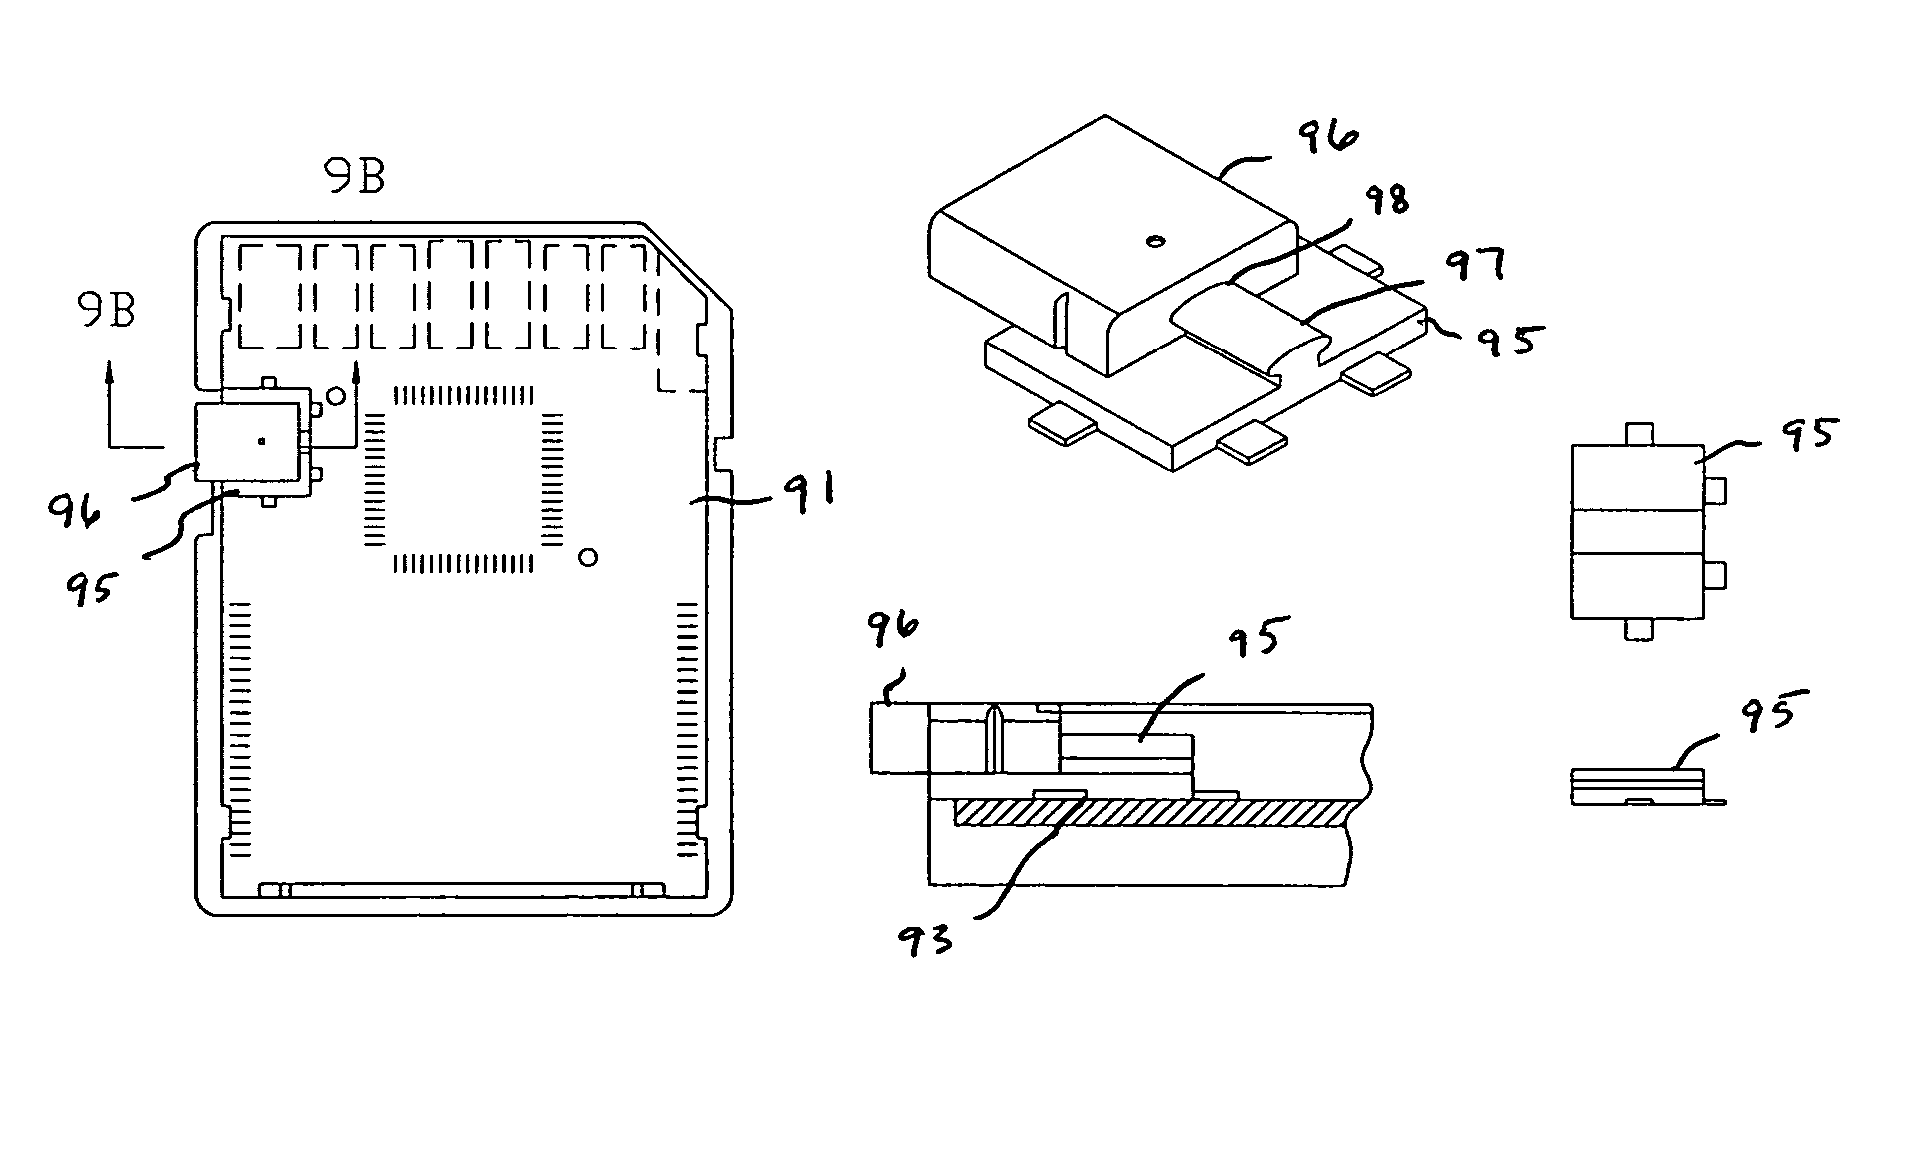 Removable flash integrated memory module card and method of manufacture